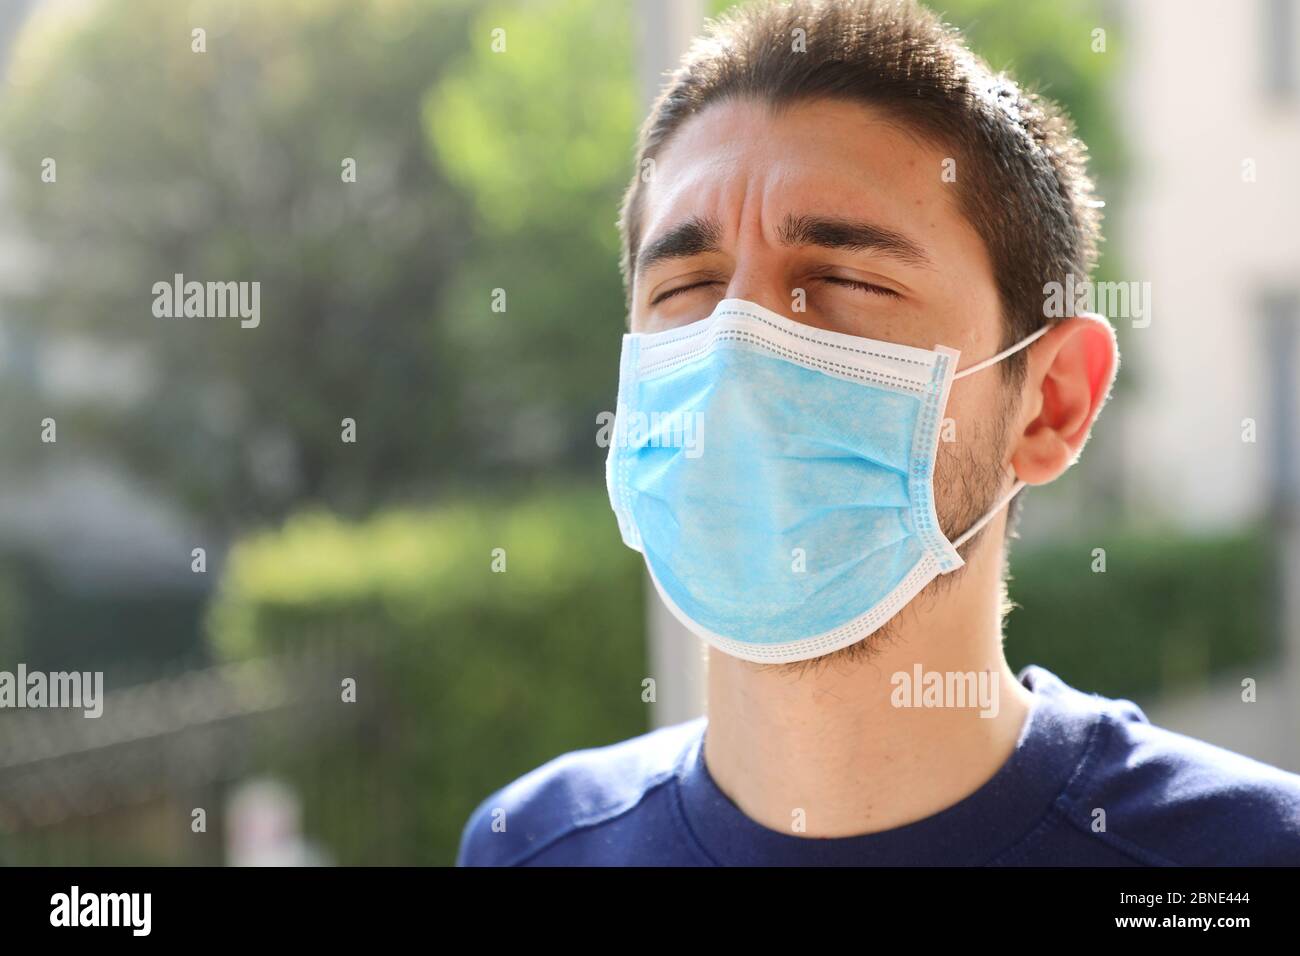 COVID-19 Pandemic Coronavirus Close up of man with surgical mask breathing outdoor Stock Photo